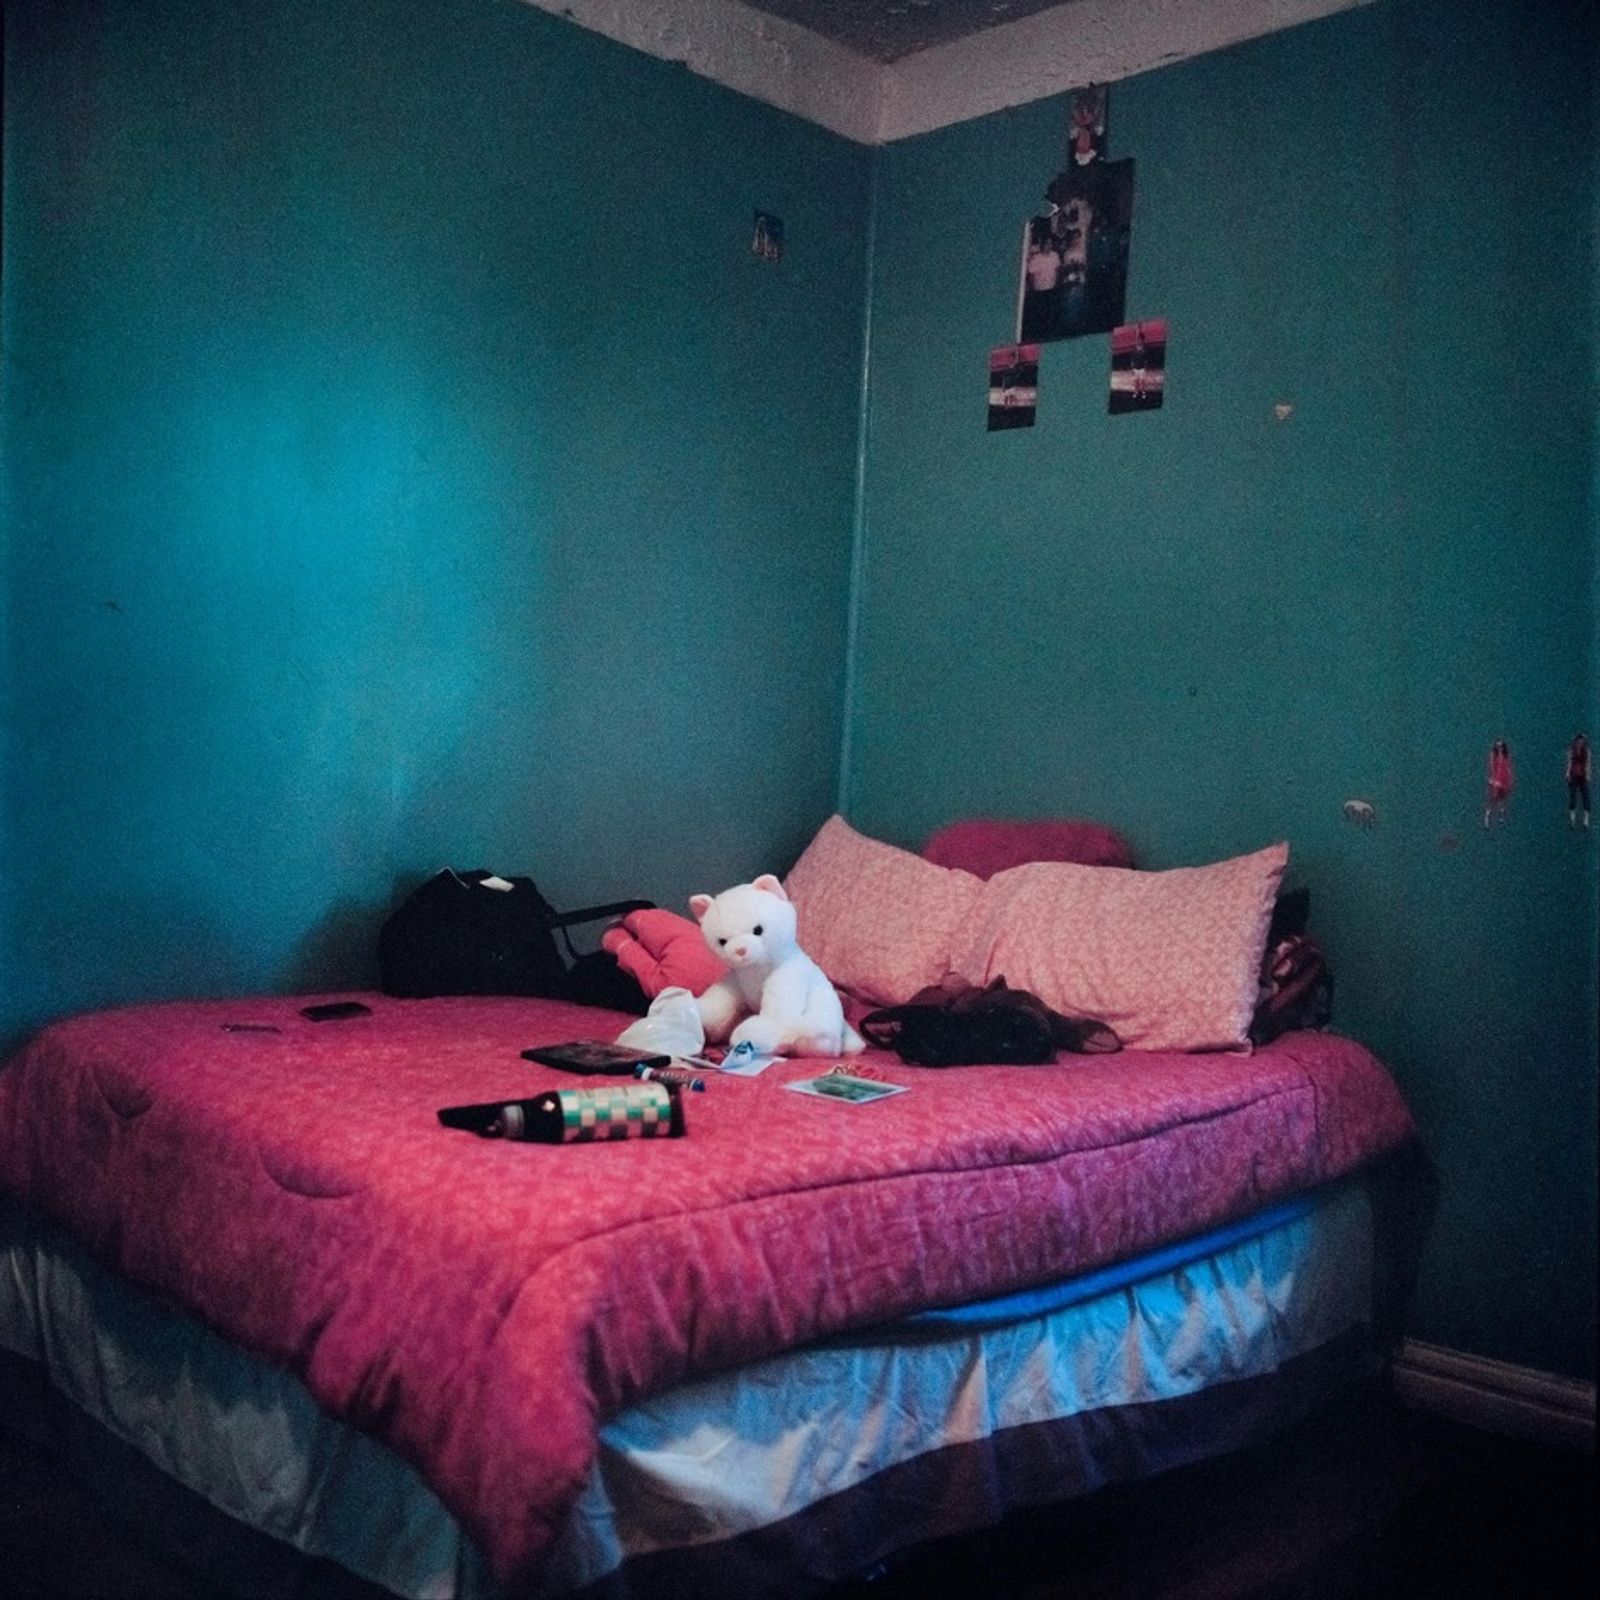 © Ruth Prieto - Delia painted her room in blue. “It was my favorite color sometime ago, now I want to paint it pink”.